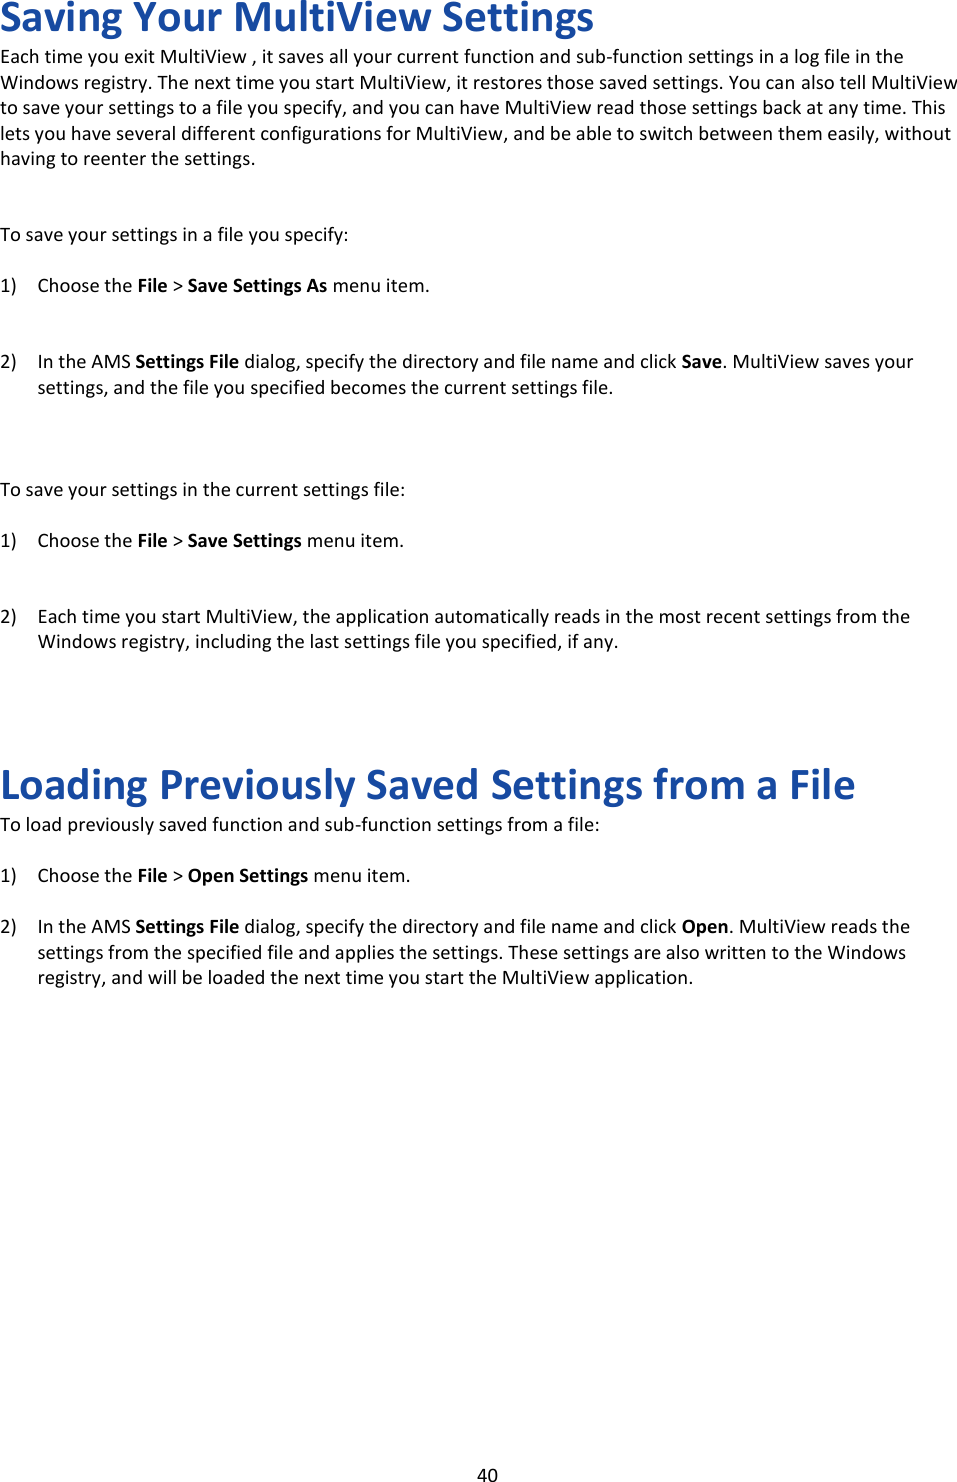   40 Saving Your MultiView Settings Each time you exit MultiView , it saves all your current function and sub-function settings in a log file in the Windows registry. The next time you start MultiView, it restores those saved settings. You can also tell MultiView to save your settings to a file you specify, and you can have MultiView read those settings back at any time. This lets you have several different configurations for MultiView, and be able to switch between them easily, without having to reenter the settings.   To save your settings in a file you specify:  1) Choose the File &gt; Save Settings As menu item.   2) In the AMS Settings File dialog, specify the directory and file name and click Save. MultiView saves your settings, and the file you specified becomes the current settings file.    To save your settings in the current settings file:  1) Choose the File &gt; Save Settings menu item.   2) Each time you start MultiView, the application automatically reads in the most recent settings from the Windows registry, including the last settings file you specified, if any.     Loading Previously Saved Settings from a File To load previously saved function and sub-function settings from a file:  1) Choose the File &gt; Open Settings menu item.  2) In the AMS Settings File dialog, specify the directory and file name and click Open. MultiView reads the settings from the specified file and applies the settings. These settings are also written to the Windows registry, and will be loaded the next time you start the MultiView application.                  